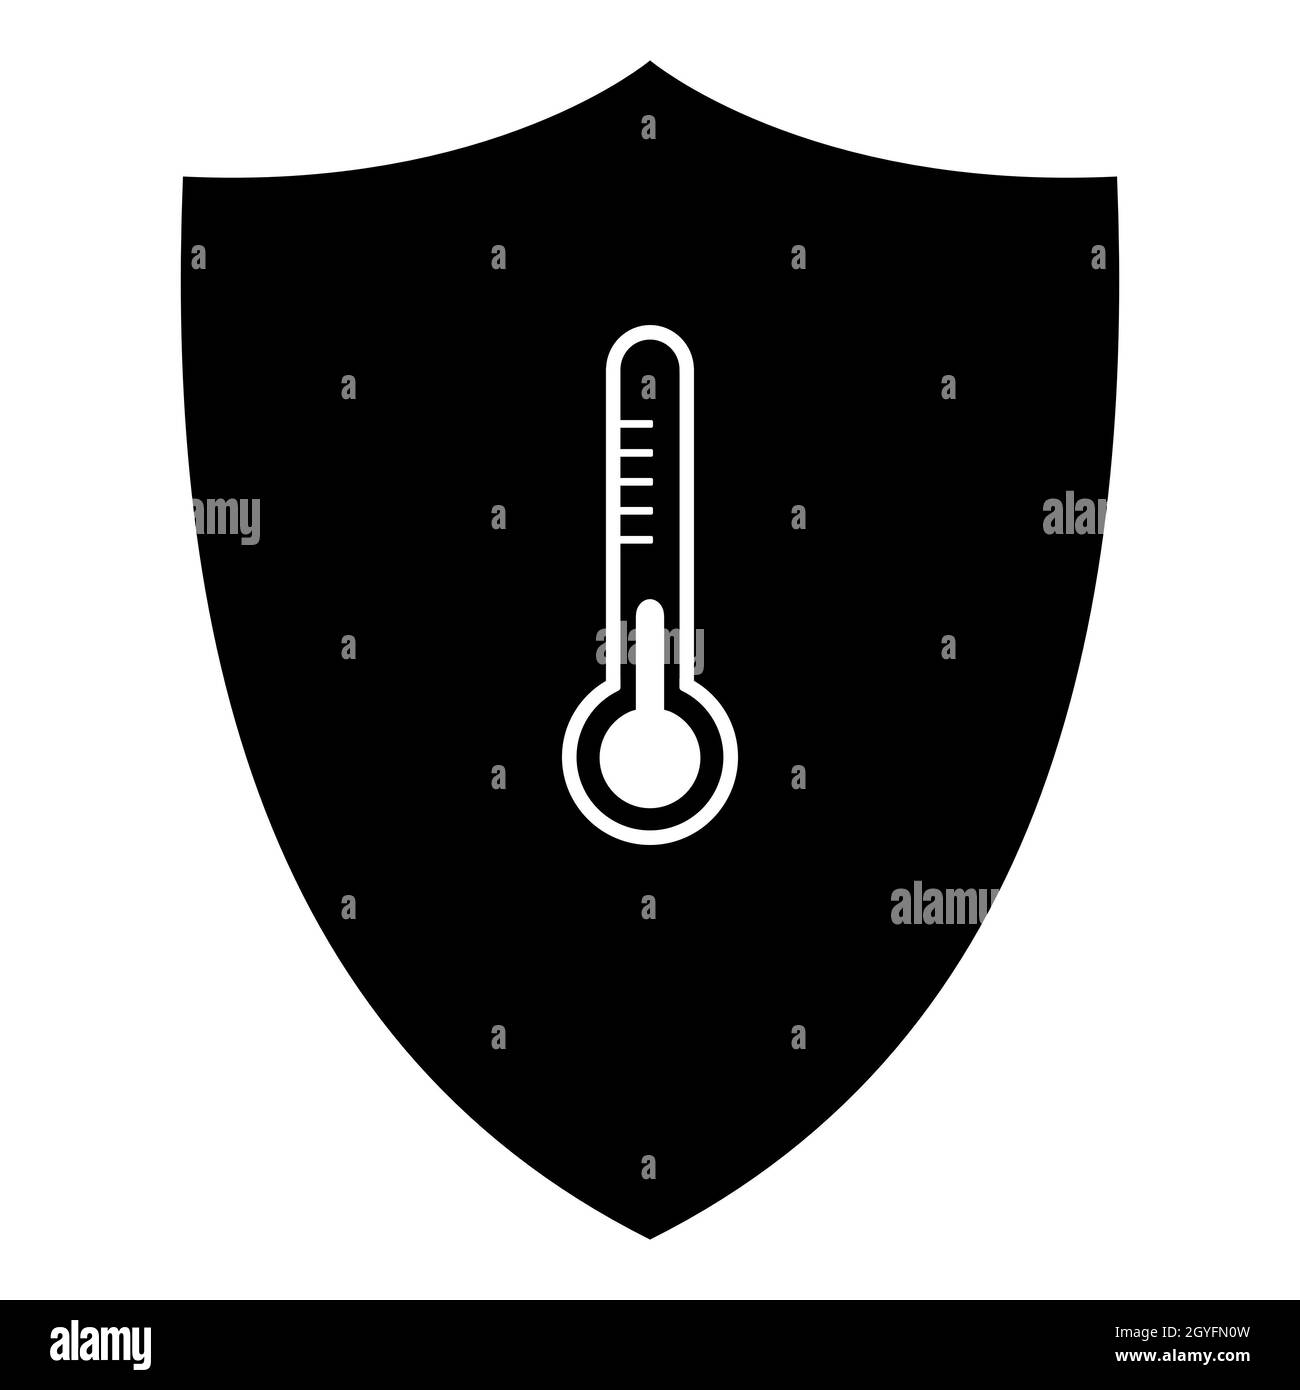 Thermometer and shield Stock Photo